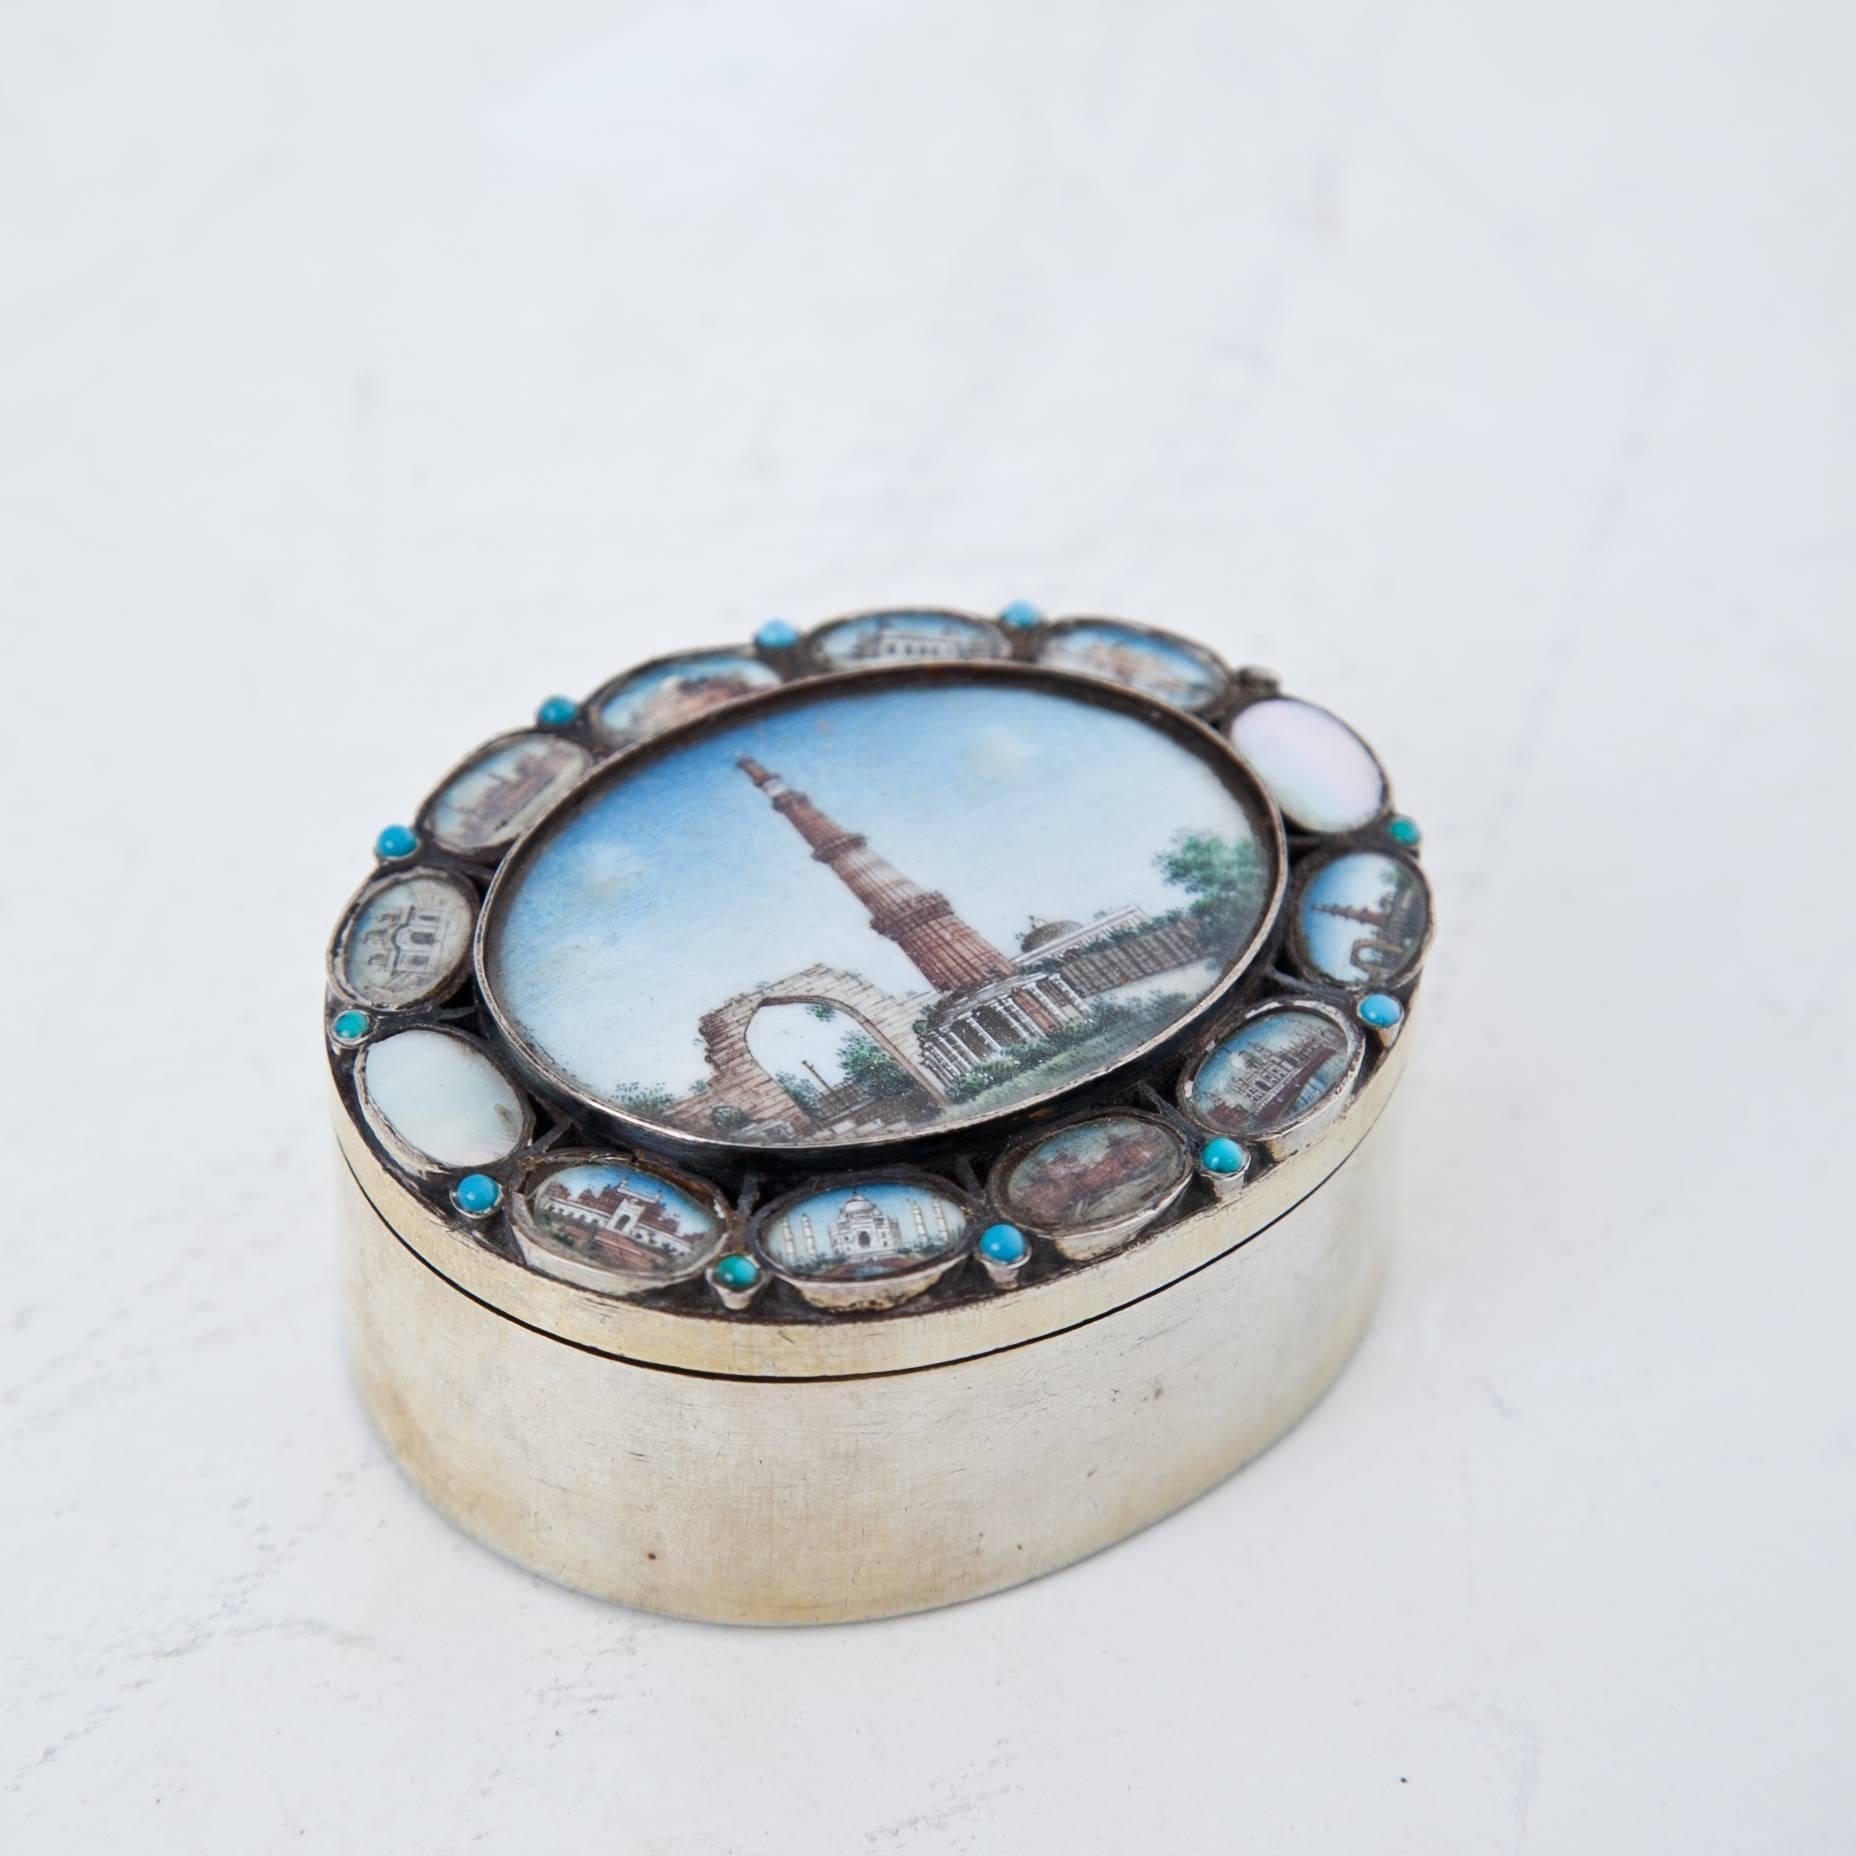 Oval silver box with miniature depictions of important monuments of India. In the center is a large depiction of Qutb Minar, the famous watchtower of Delhi. In the smaller medallions, one can find among others a depiction of the Taj Mahal.